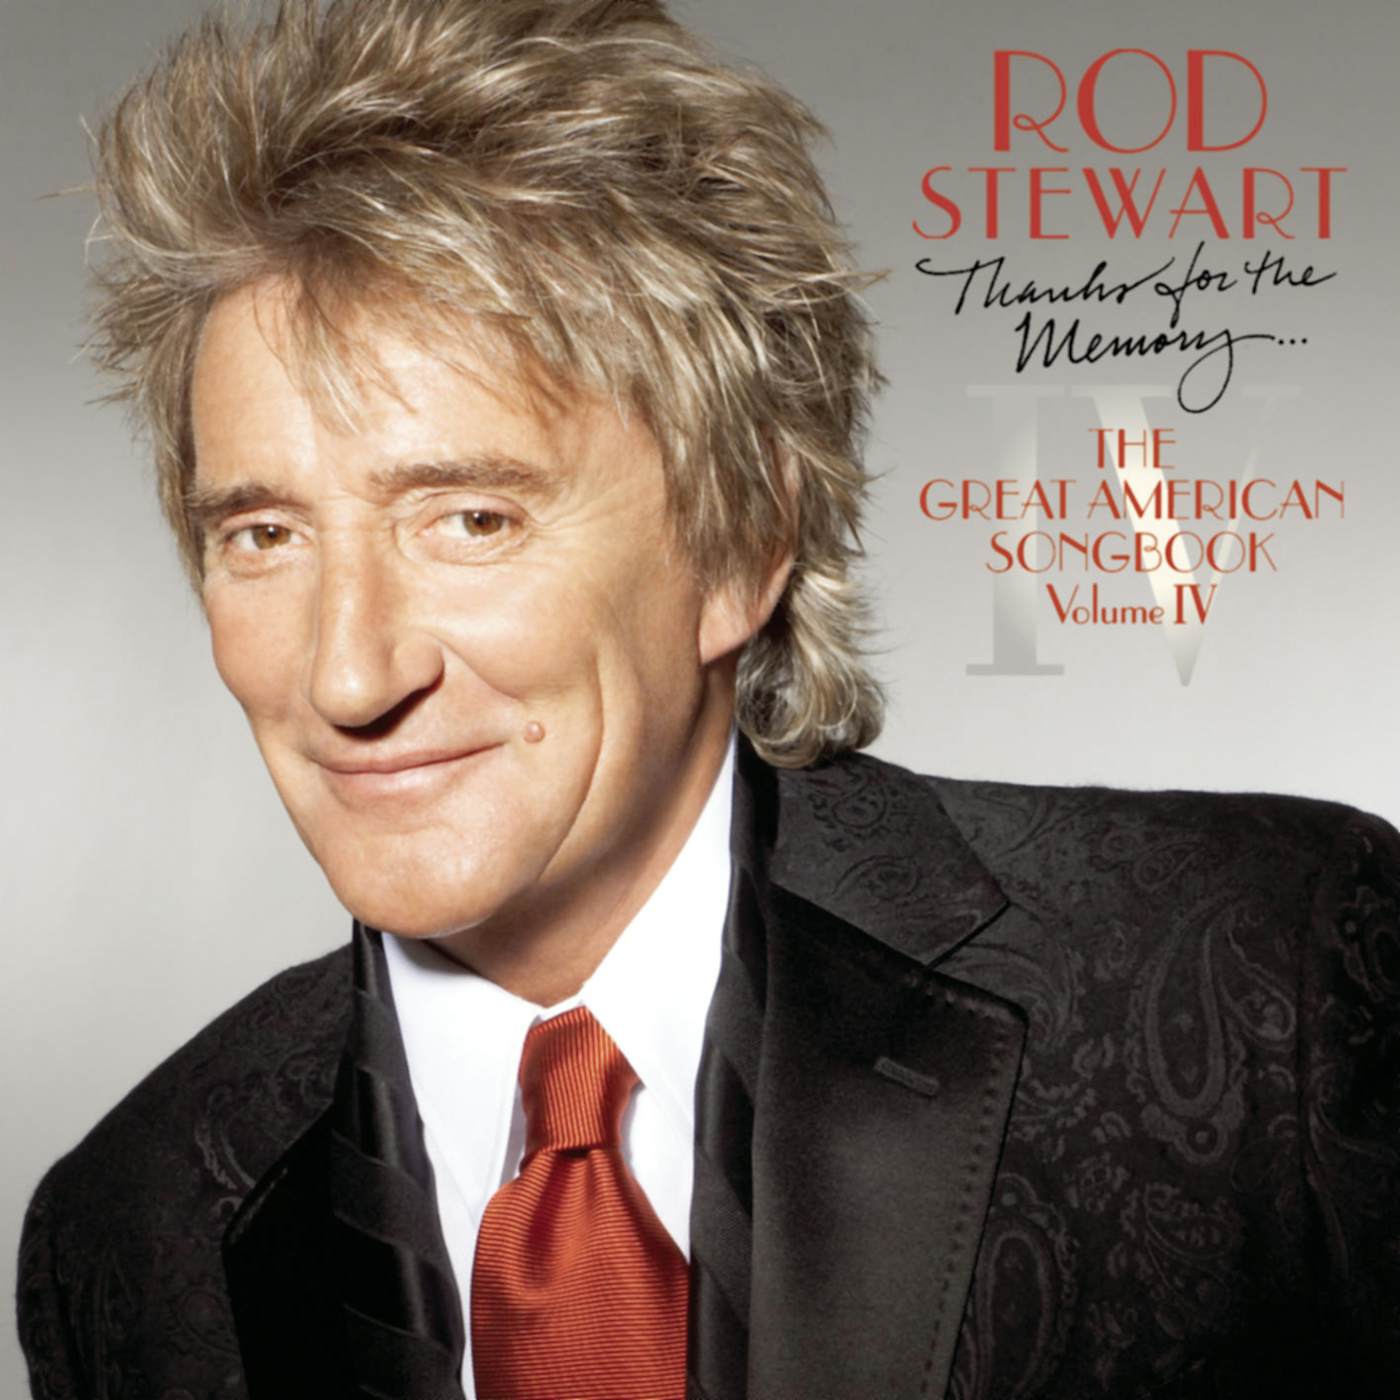 Rod Stewart THANKS FOR THE MEMORY: GREAT AMERICAN SONGBOOK IV CD